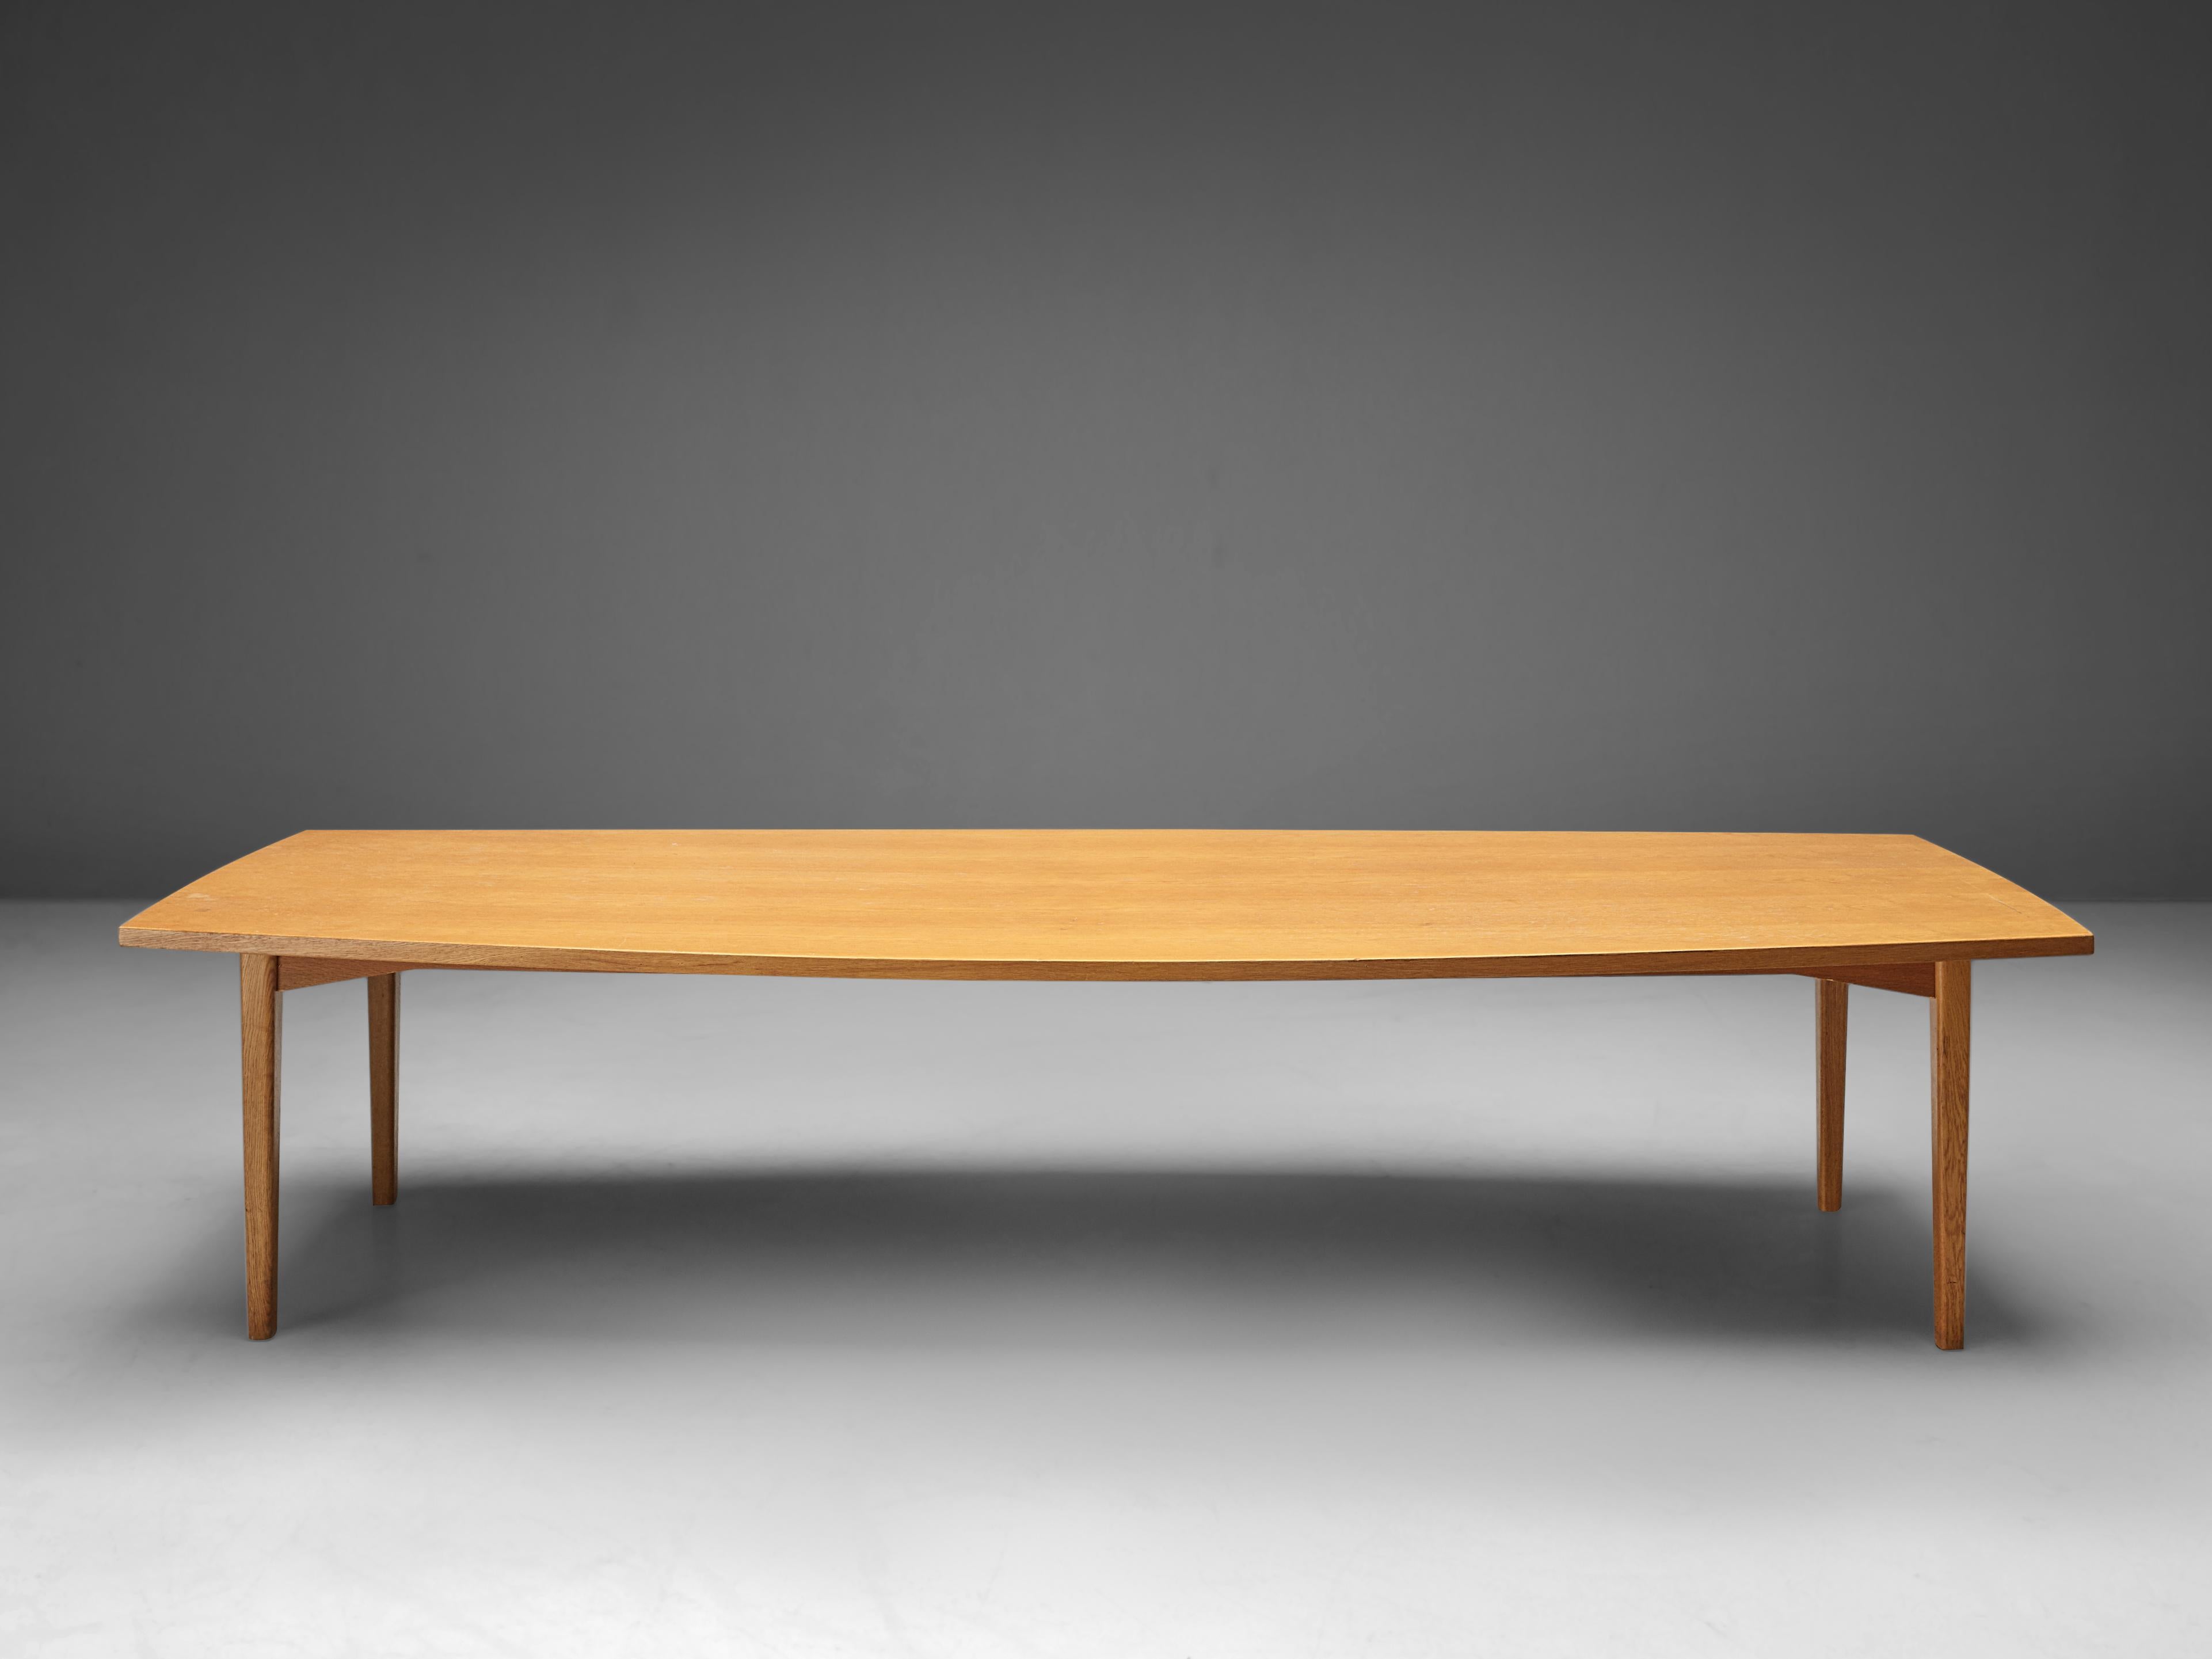 Conference table, oak, Denmark, 1950s.

A 3.3 meter / 130 inch large dining table in oak. The barrel-shaped tabletop is made out of one piece, featuring a beautiful grain. The base consists of four slender rounded rectangular legs that make the